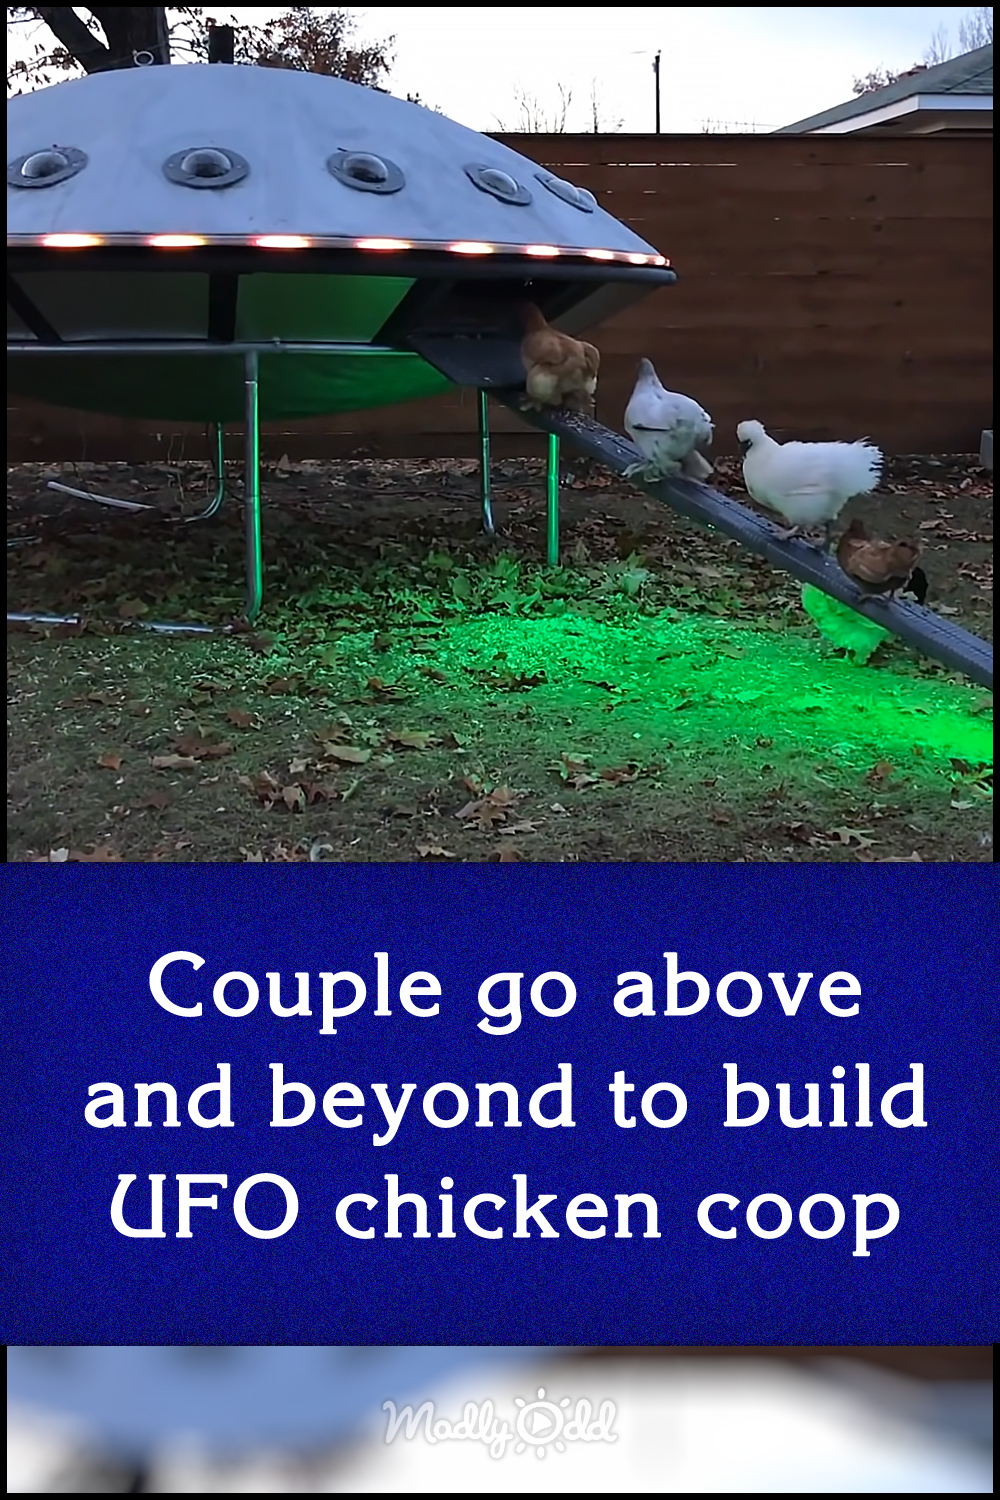 Couple go above and beyond to build UFO chicken coop